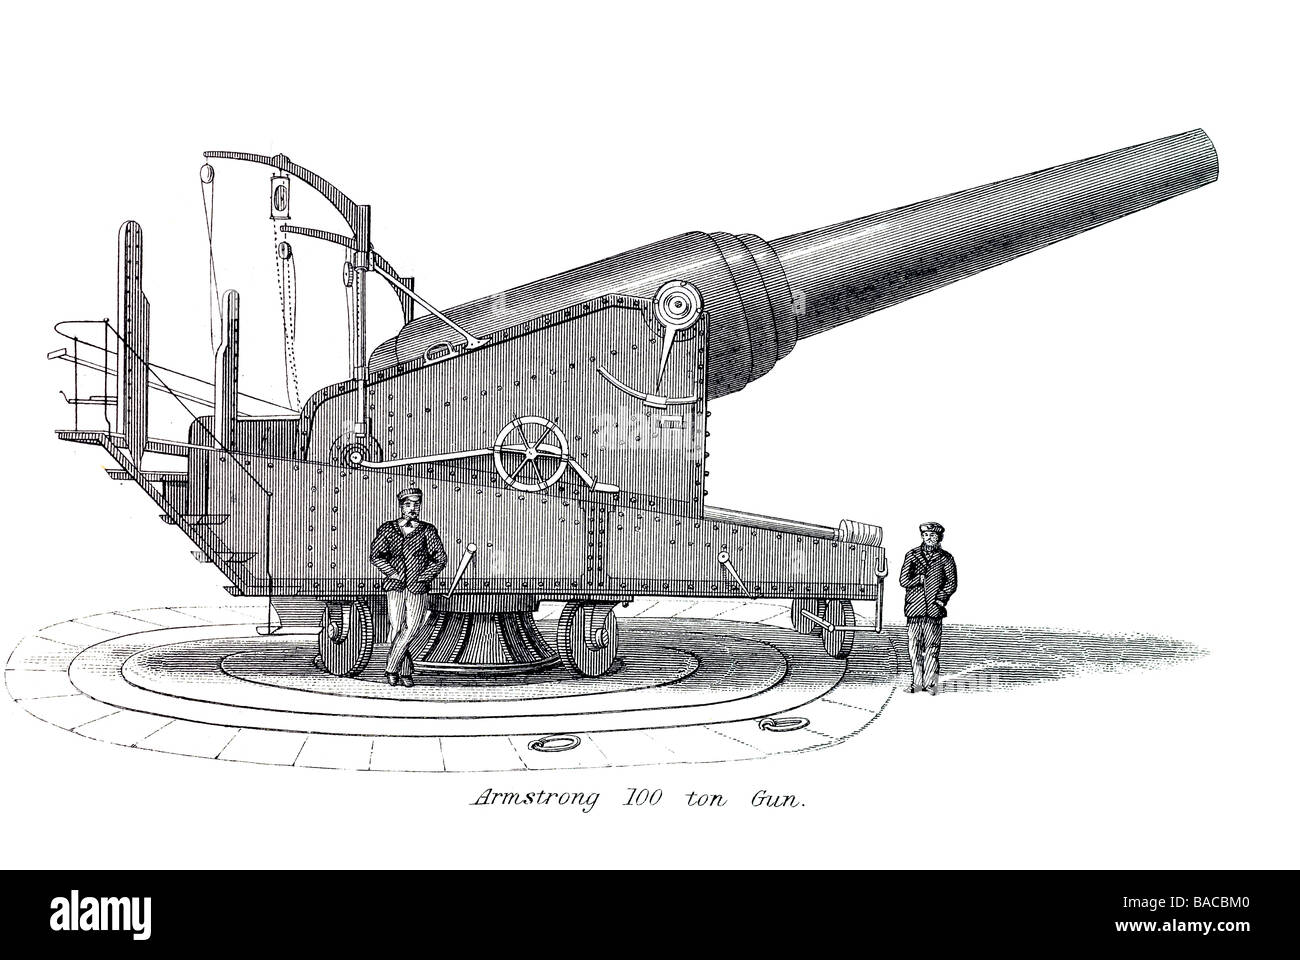 armstrong 100 ton gun cannon Gun large rifled Sir William Armstrong Elswick Ordnance Company bore defensive weapons weapon pound Stock Photo